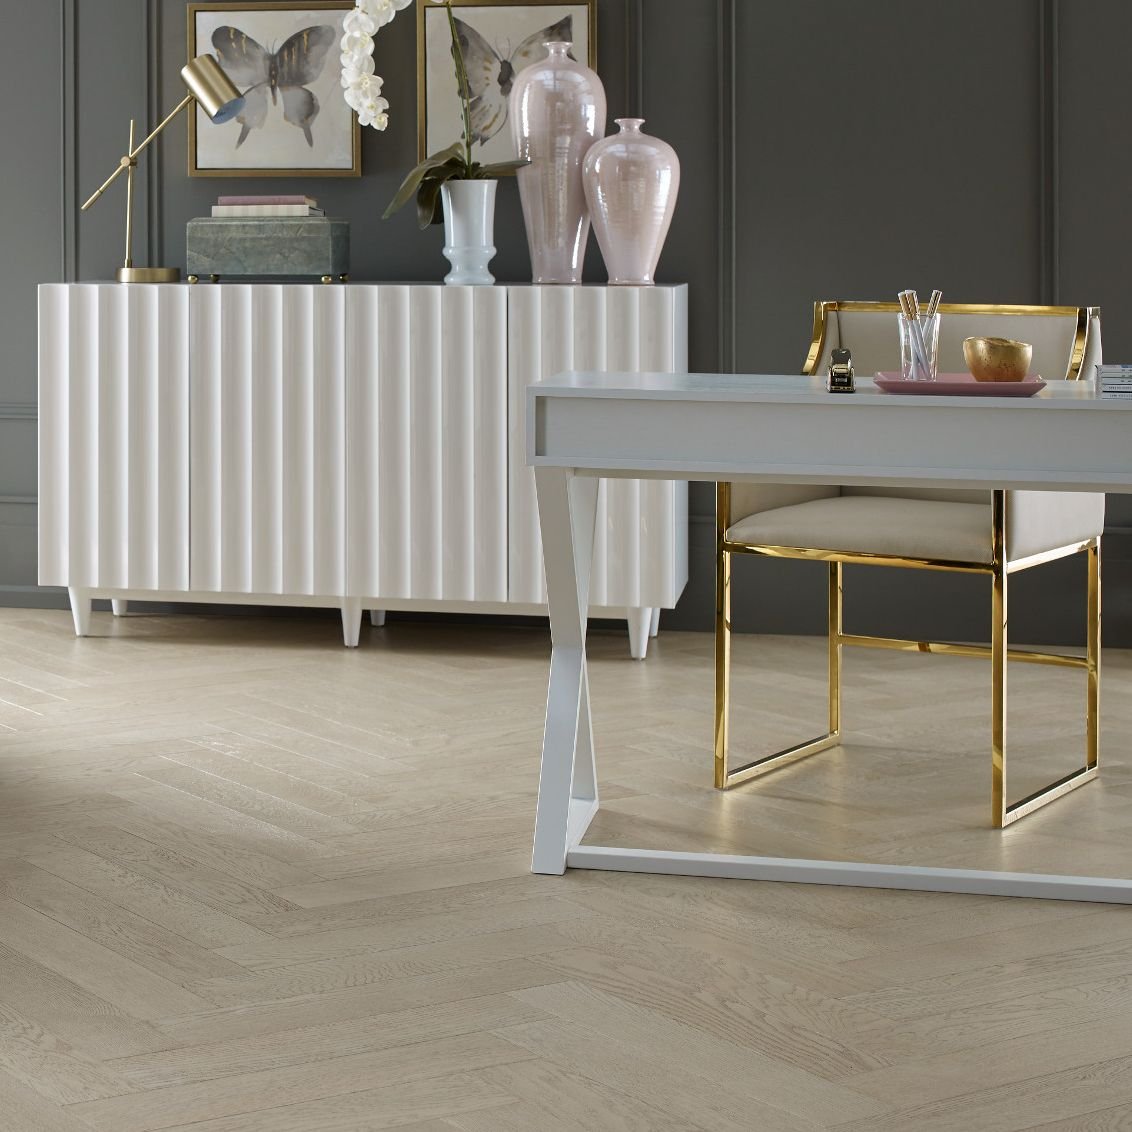 Designed In Style: Urban Luxe Articles From FAMM FLOOR COVERING, LLC in Mineral, your hometown flooring store. 540-967-1300